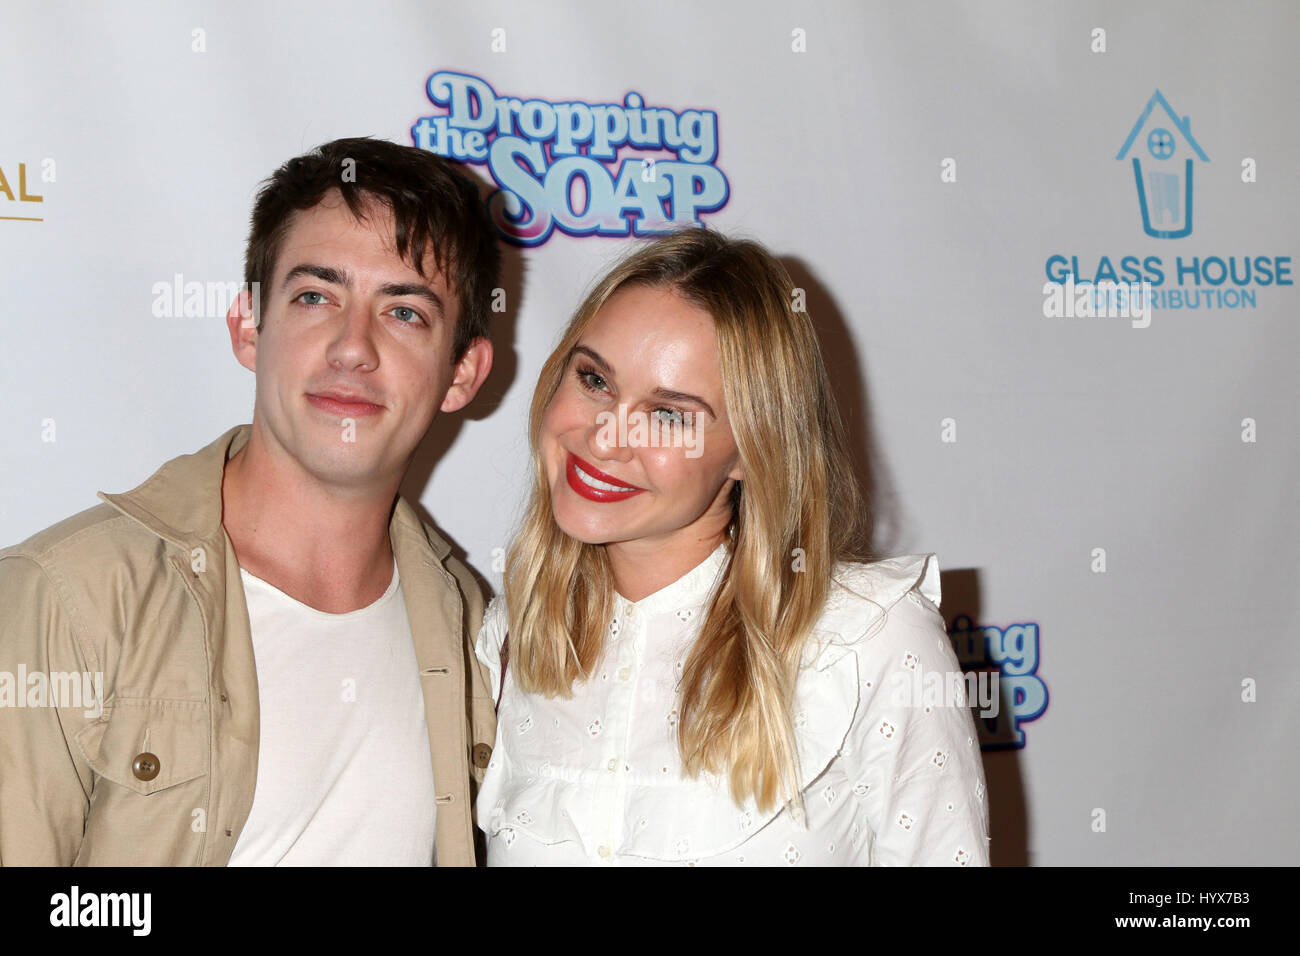 Beverly Hills, CA, USA. 7th Mar, 2017. LOS ANGELES - MAR 7: Kevin McHale, Becca Tobin at the ''Dropping the Soap'' Premiere at Writer's Guild Theater on March 7, 2017 in Beverly Hills, CA Credit: Kathy Hutchins/via ZUMA Wire/ZUMA Wire/Alamy Live News Stock Photo